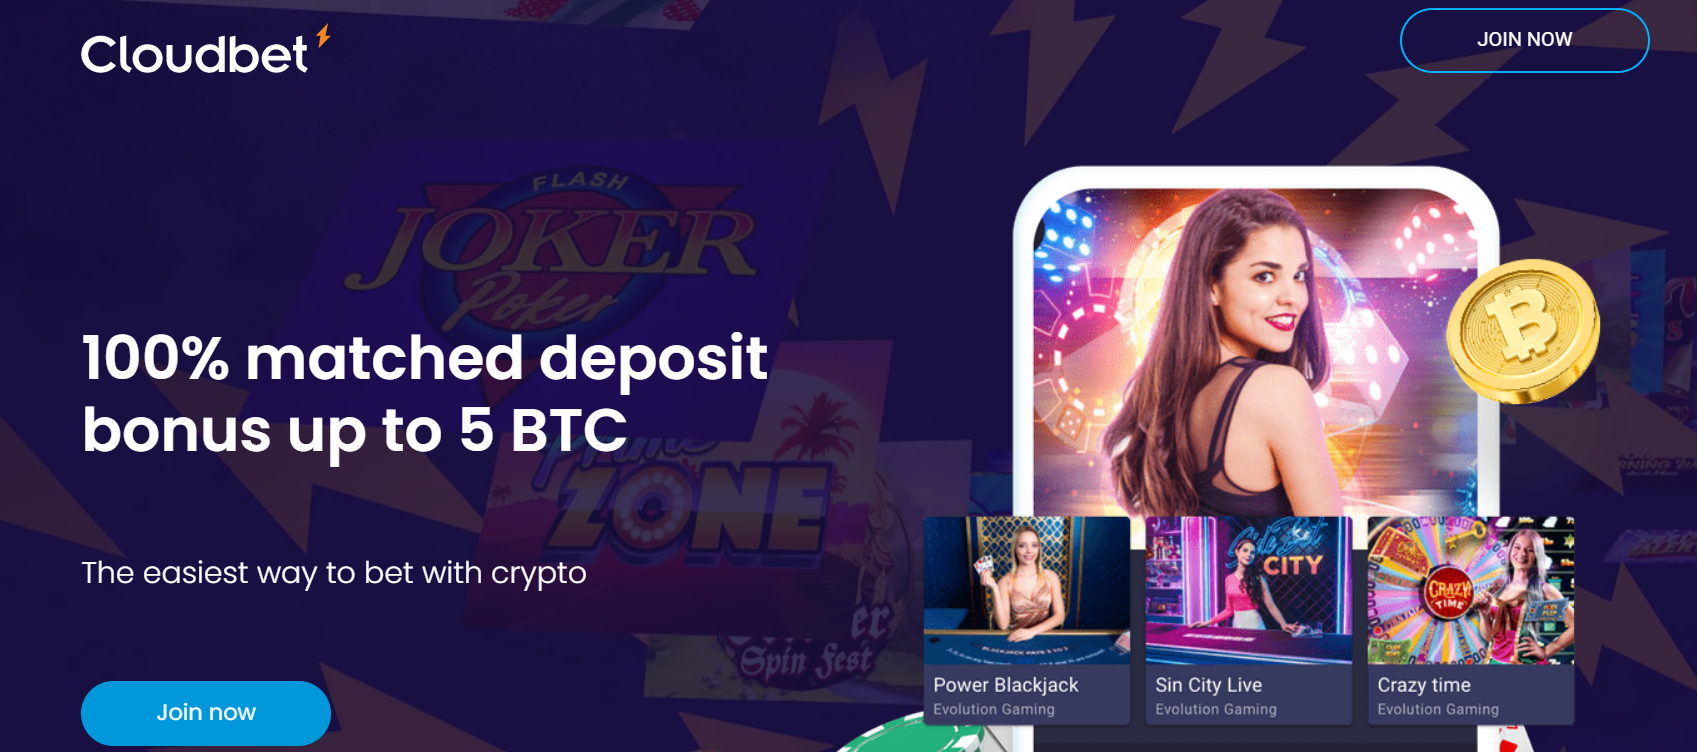 Cloudbet bitcoin casino instant withdrawal